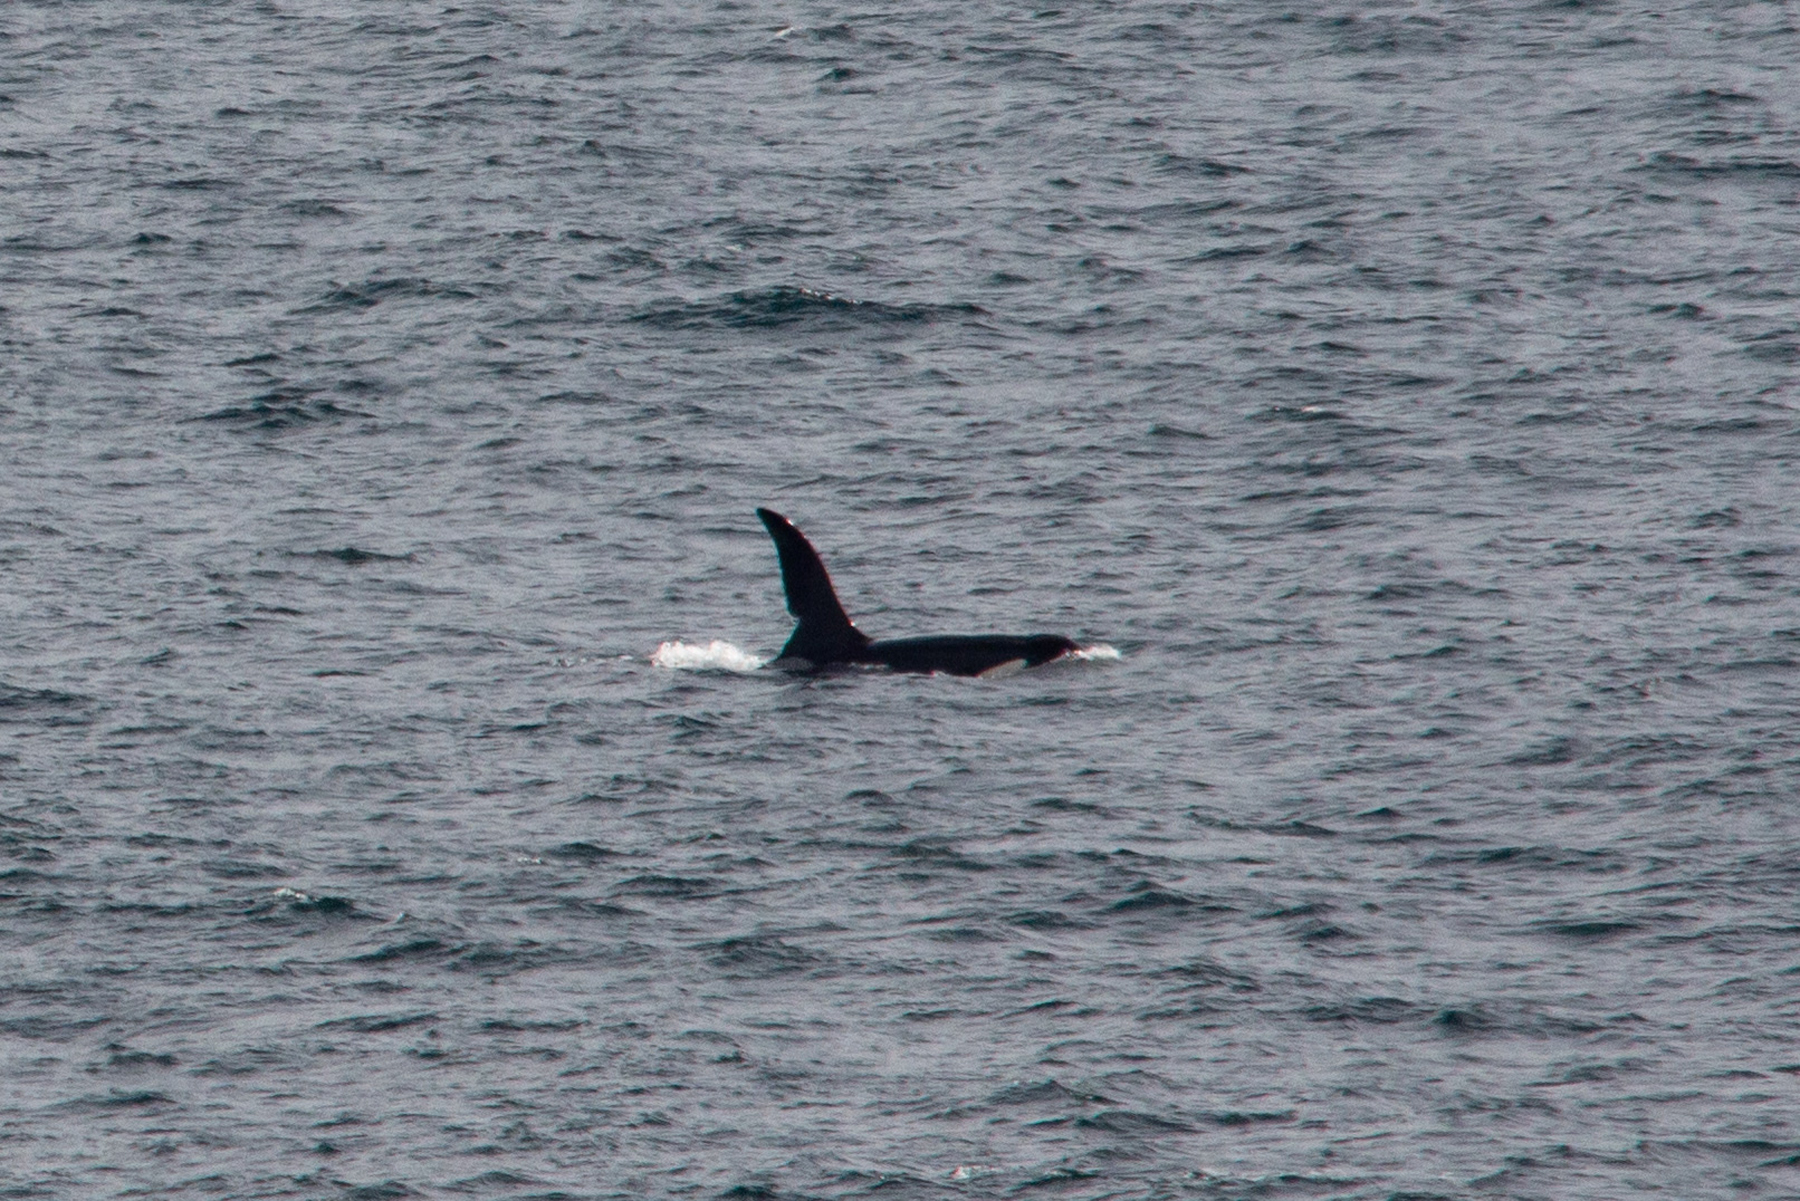 'John Coe' is one of two killer whales photographed off the Cornish coast (Will McEnery/PA)